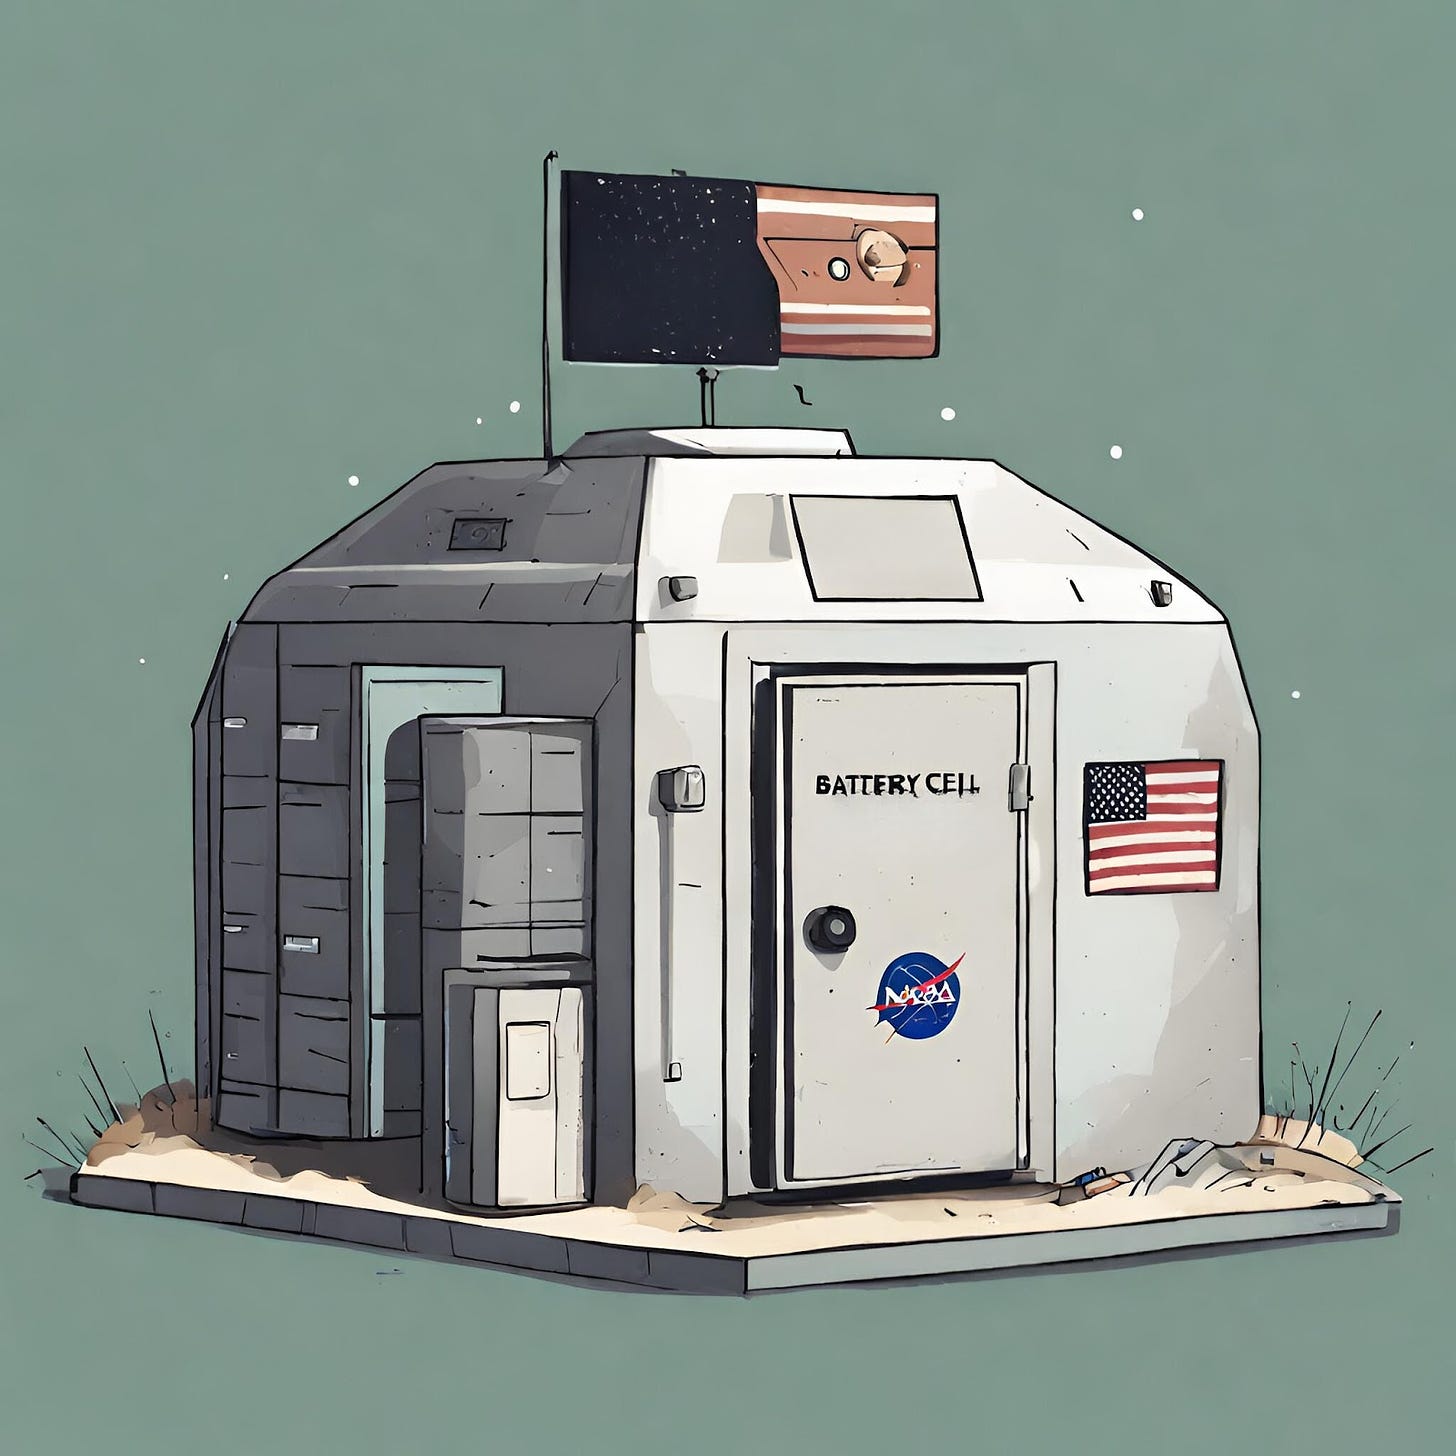 An illustration of a bunker with a nasa logo on it and a sign saying 'BATTERIES'